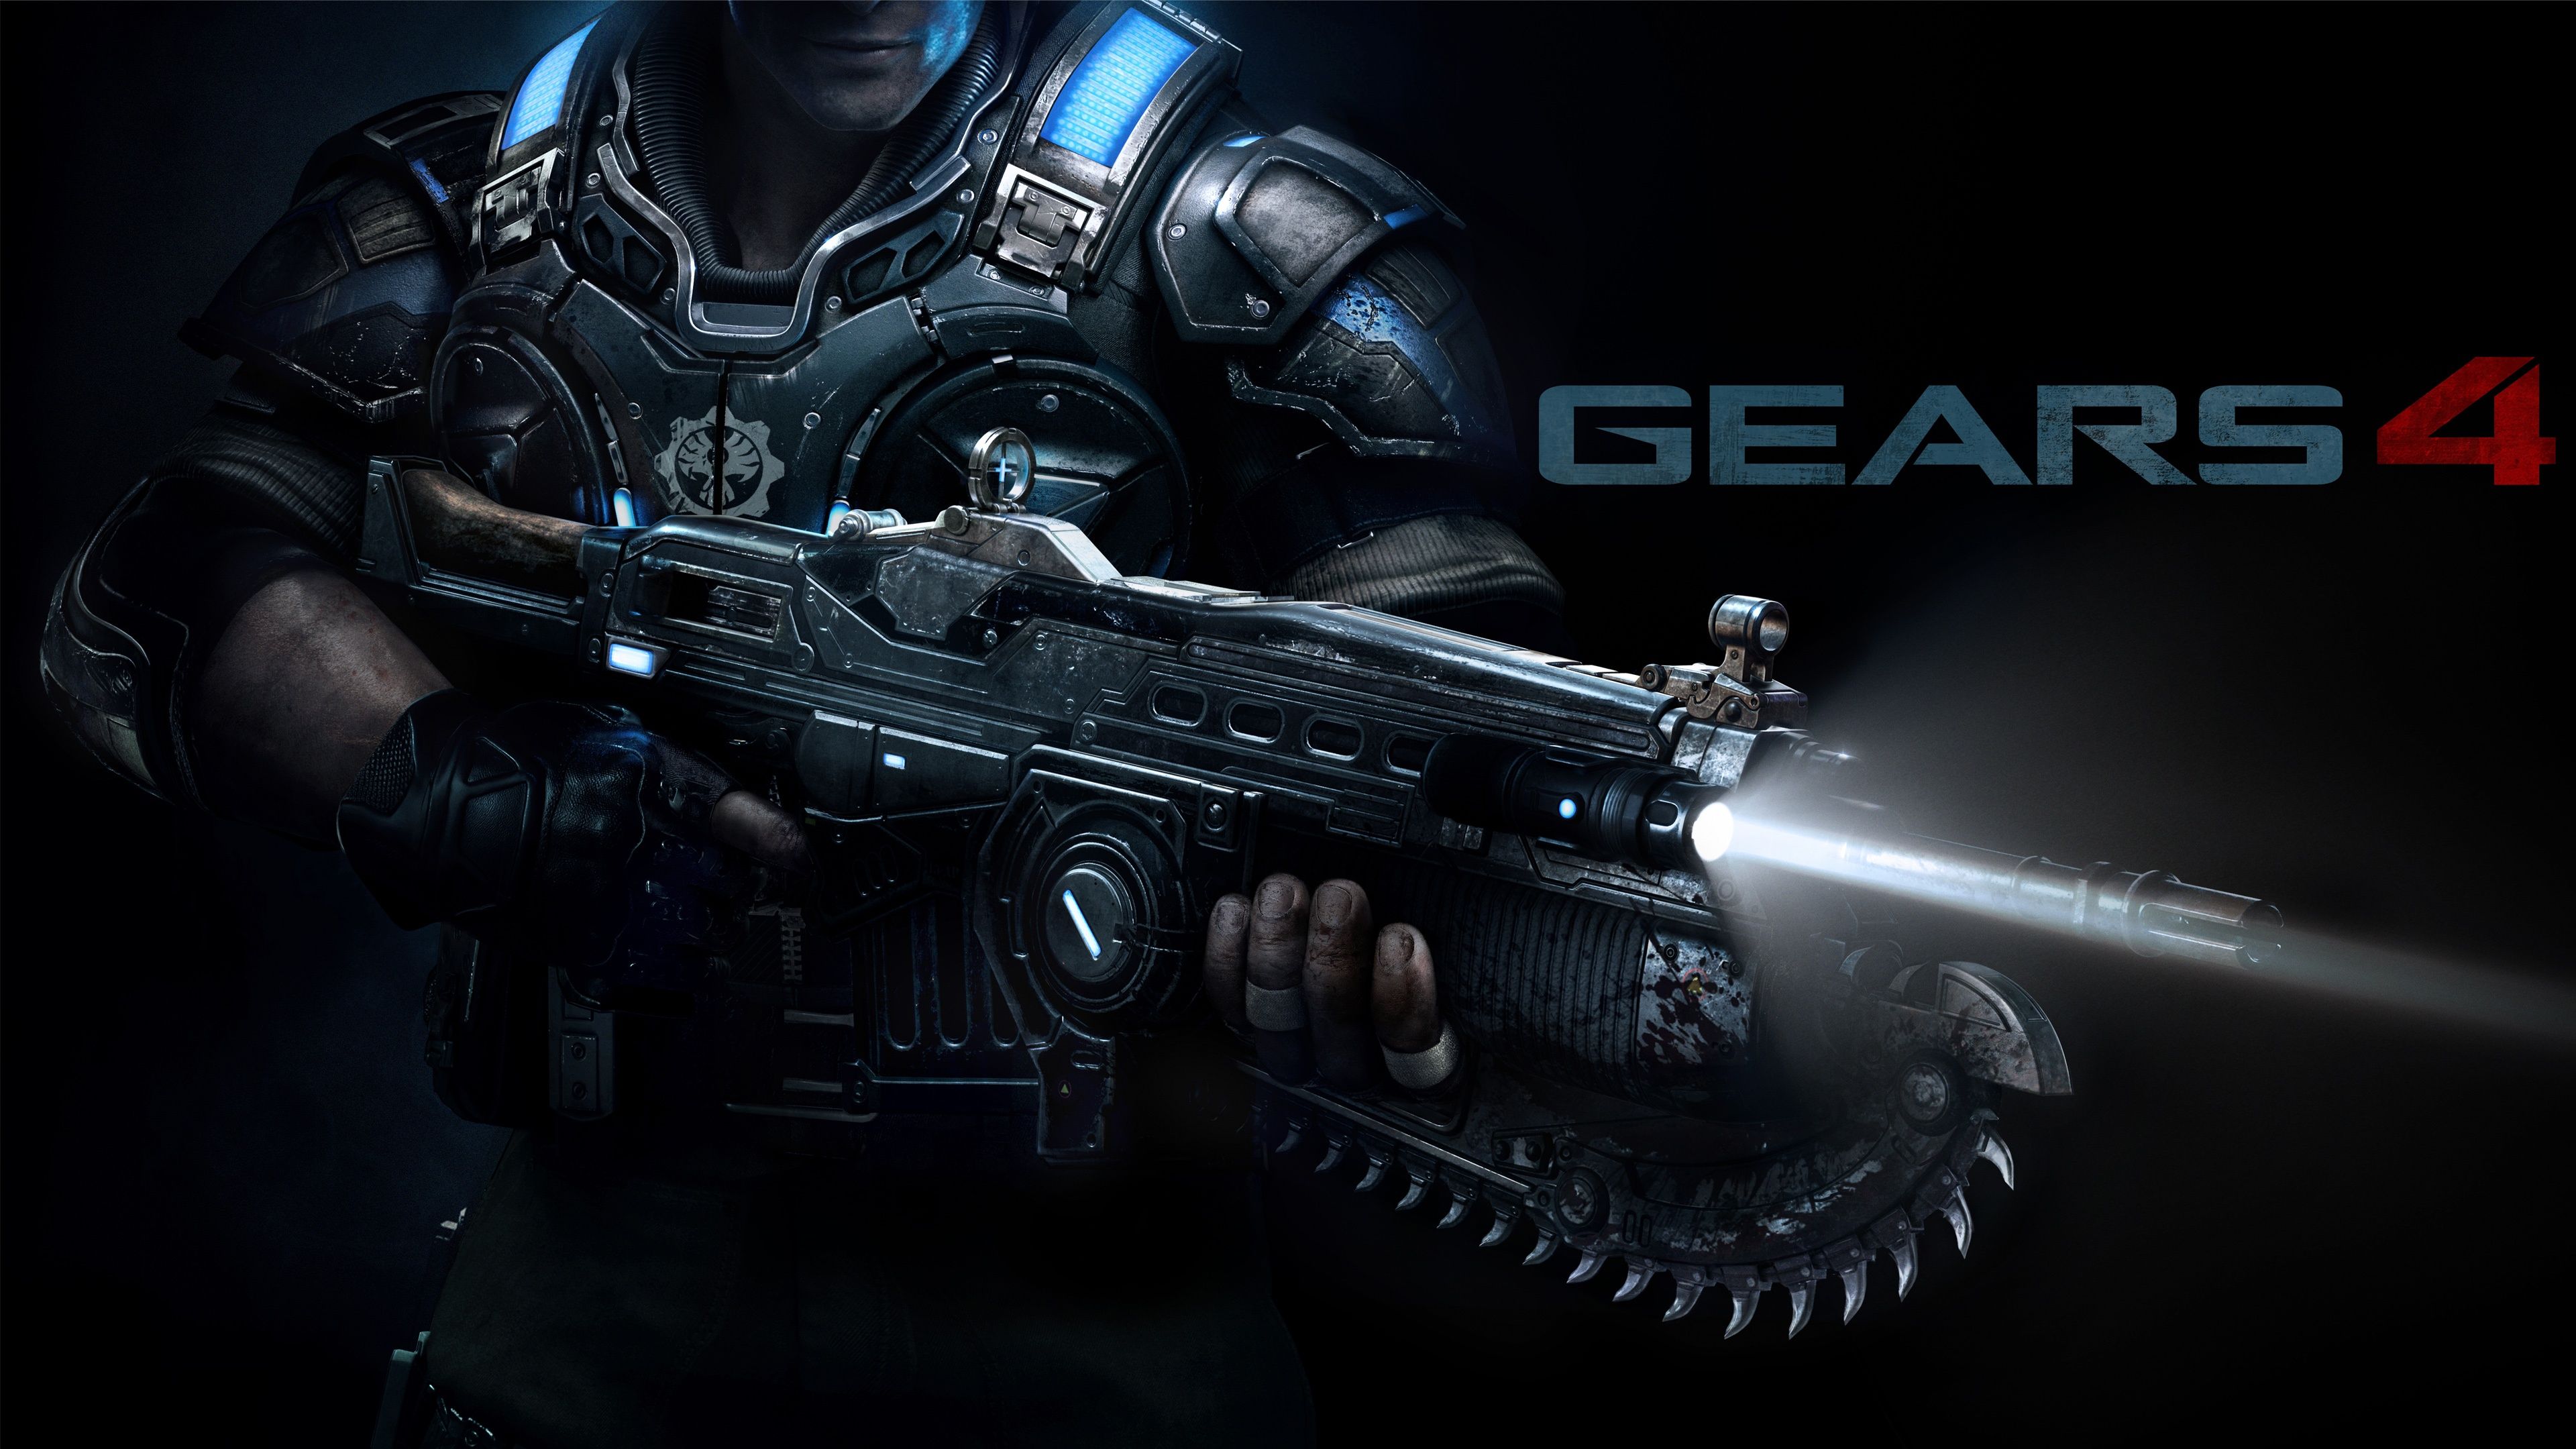 Wallpapers Tagged With GEARS | GEARS HD Wallpapers | Page 1